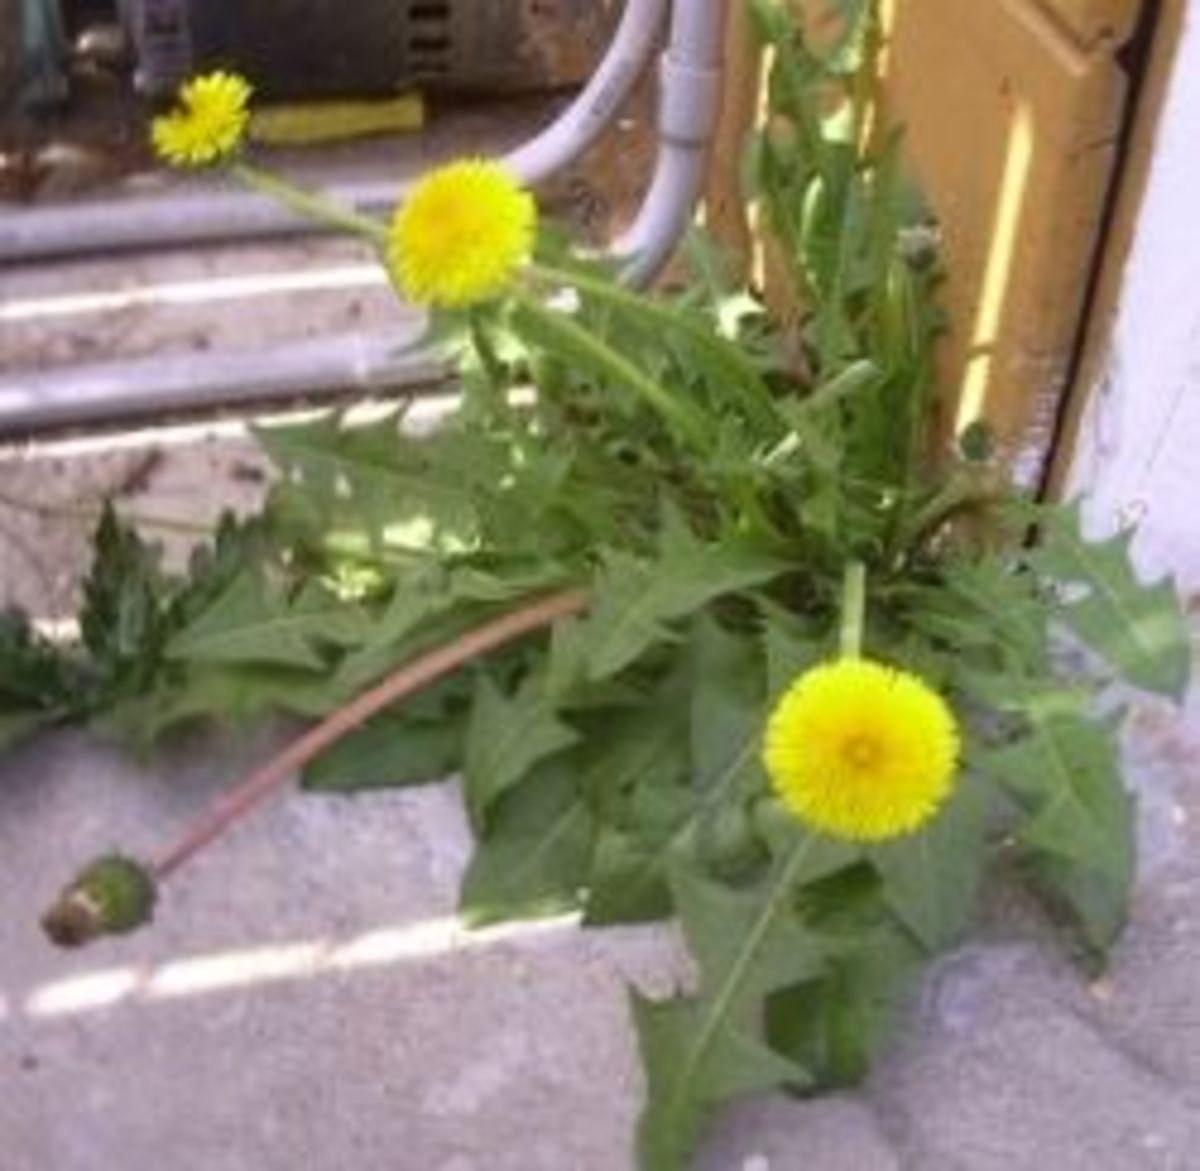 The dandelion plant in this photo was growing in the back of our house.